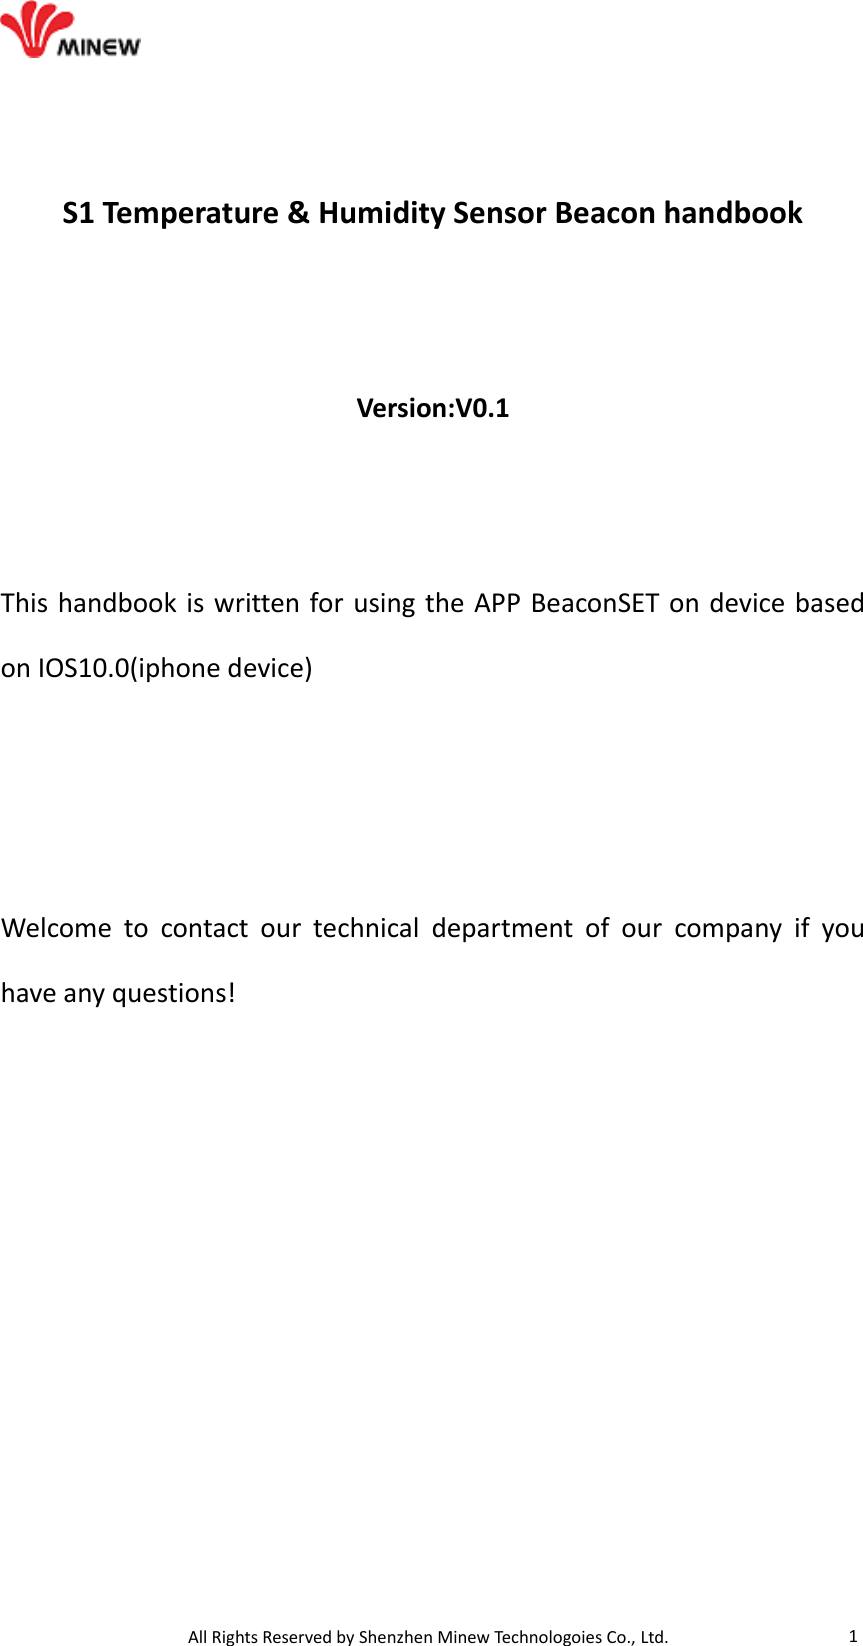                                   All Rights Reserved by Shenzhen Minew Technologoies Co., Ltd. 1   S1 Temperature &amp; Humidity Sensor Beacon handbook     Version:V0.1     This handbook is written for using the APP BeaconSET on device based on IOS10.0(iphone device)    Welcome  to  contact  our  technical  department  of  our  company  if  you have any questions!                 